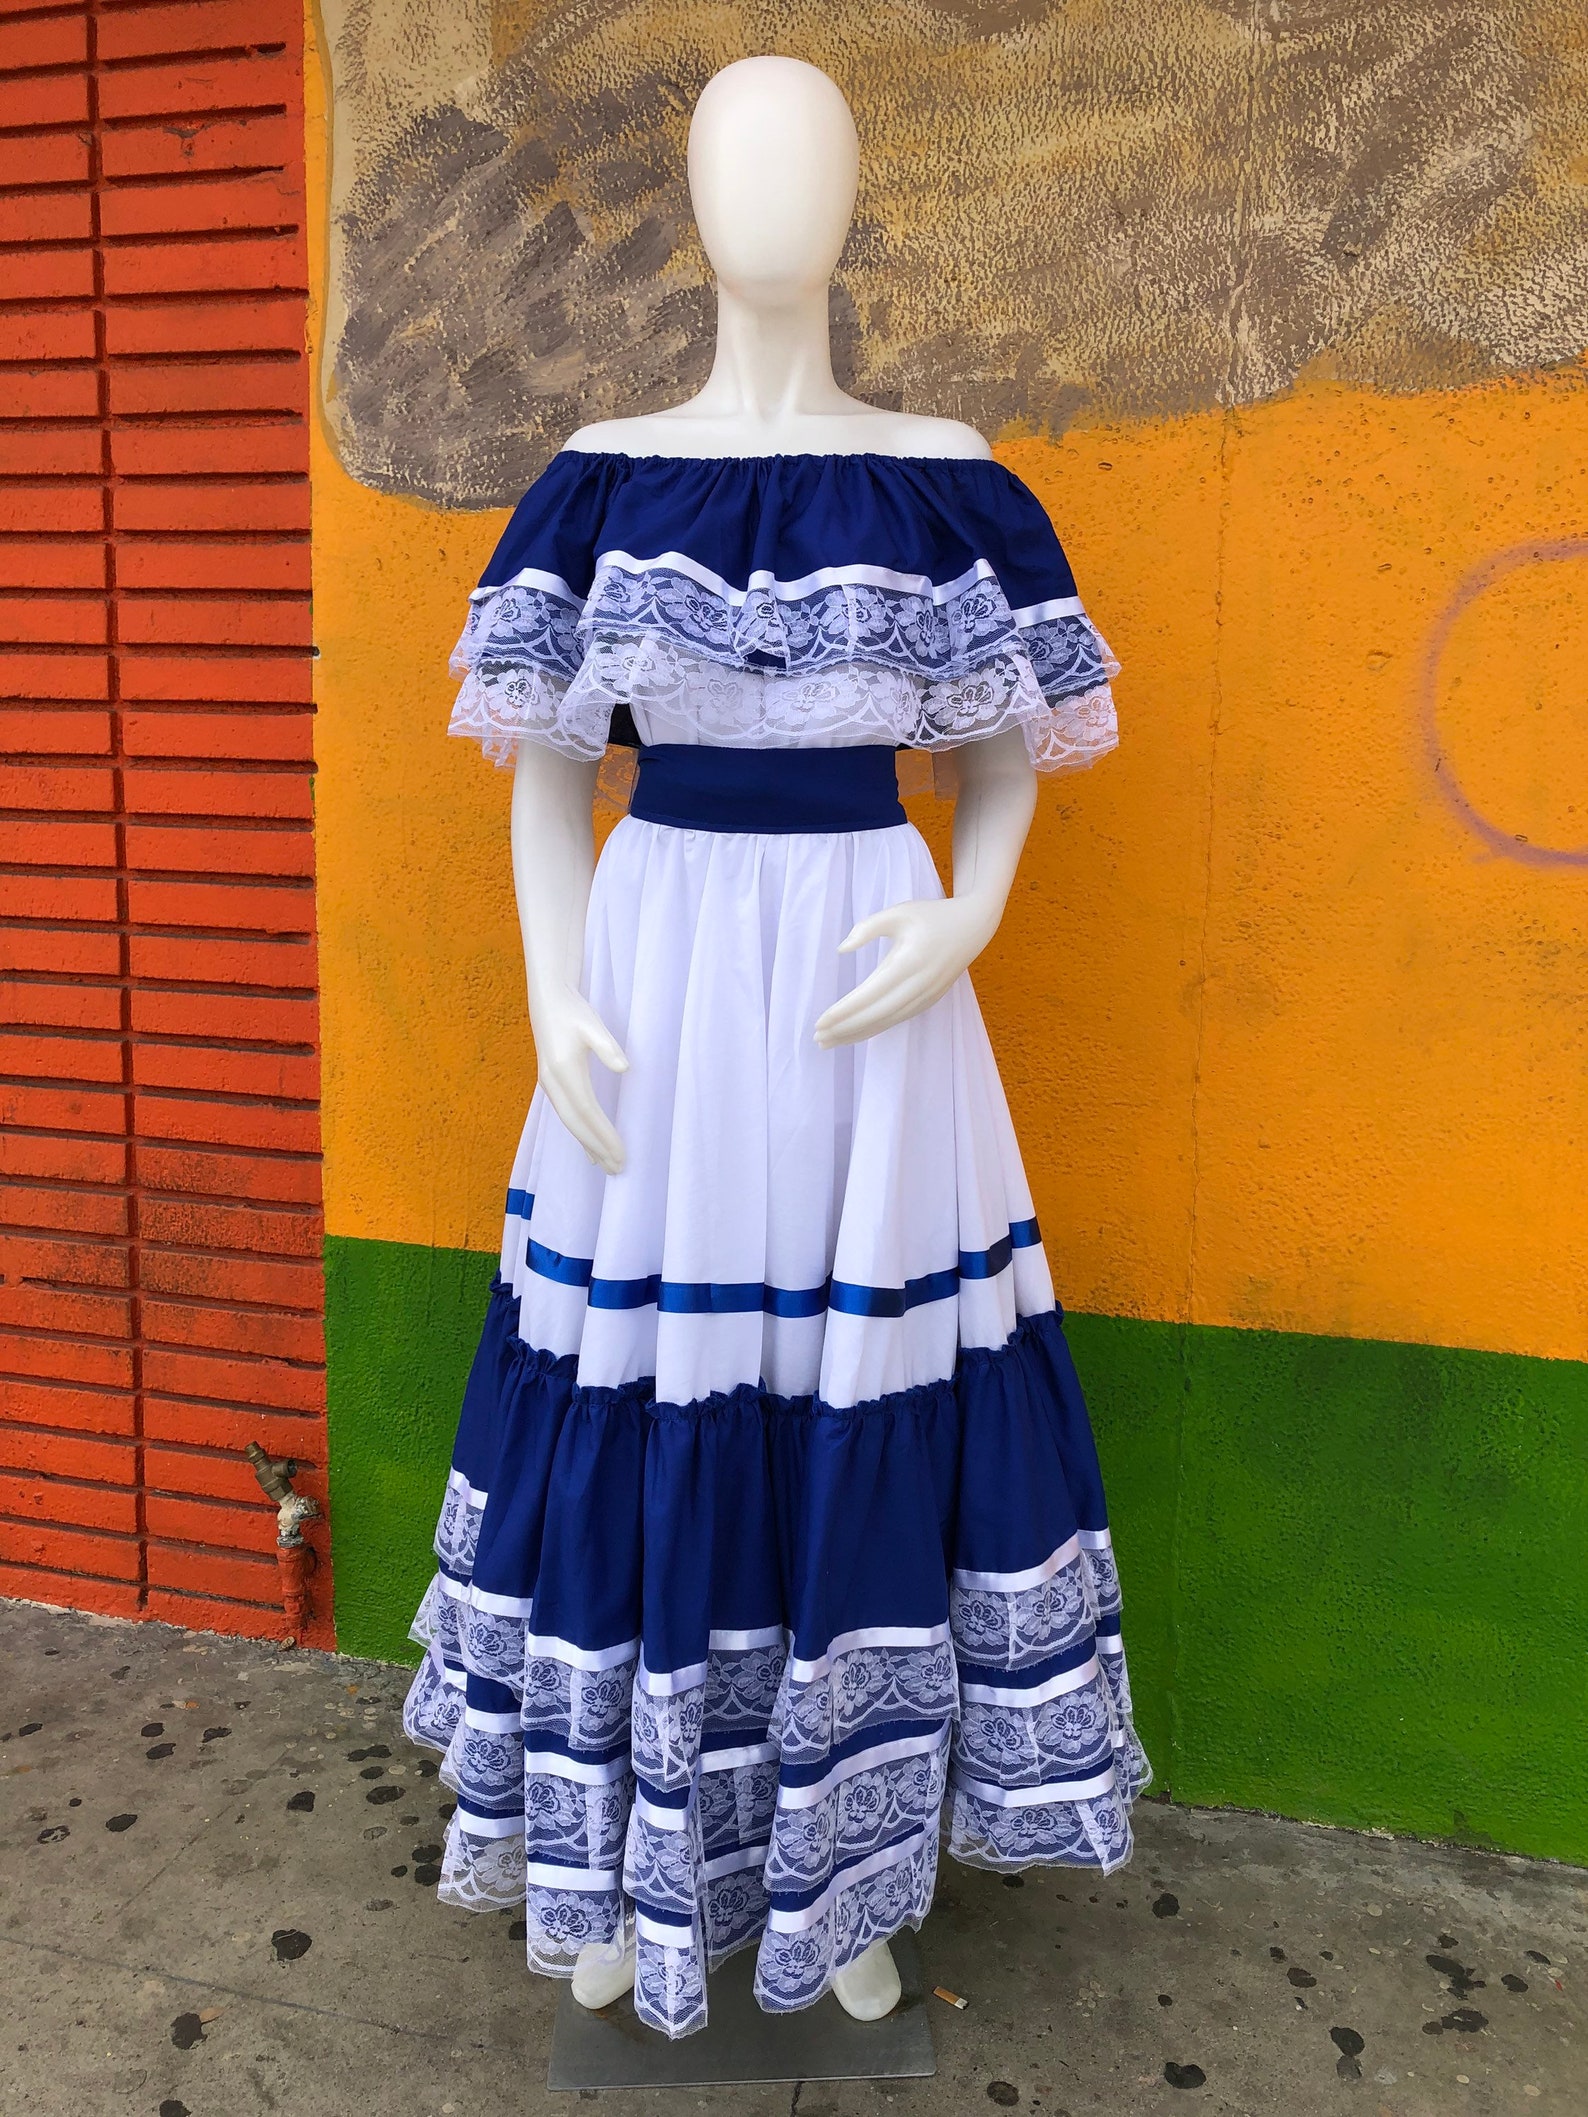 Skirt and Blouse Suit From El Salvador Honduras Nicaragua - Etsy